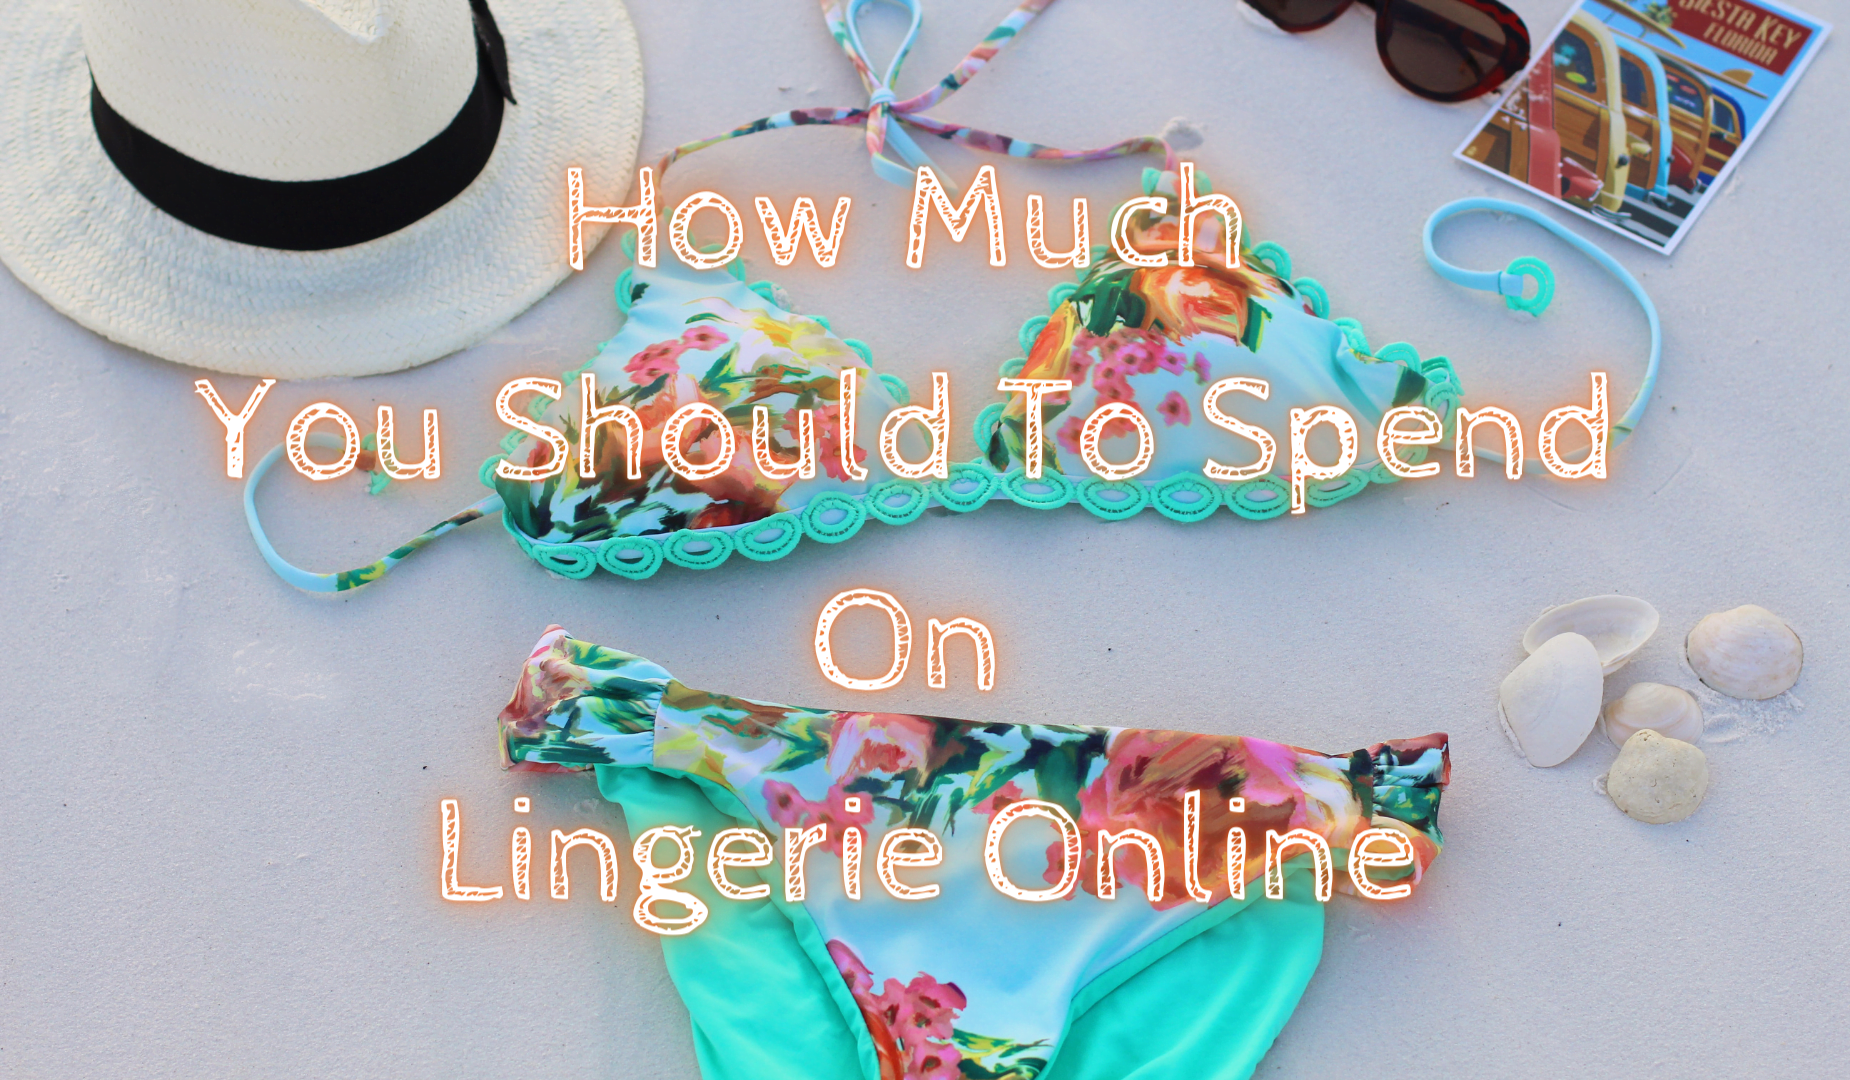 How Much You Should To Spend On Lingerie Online